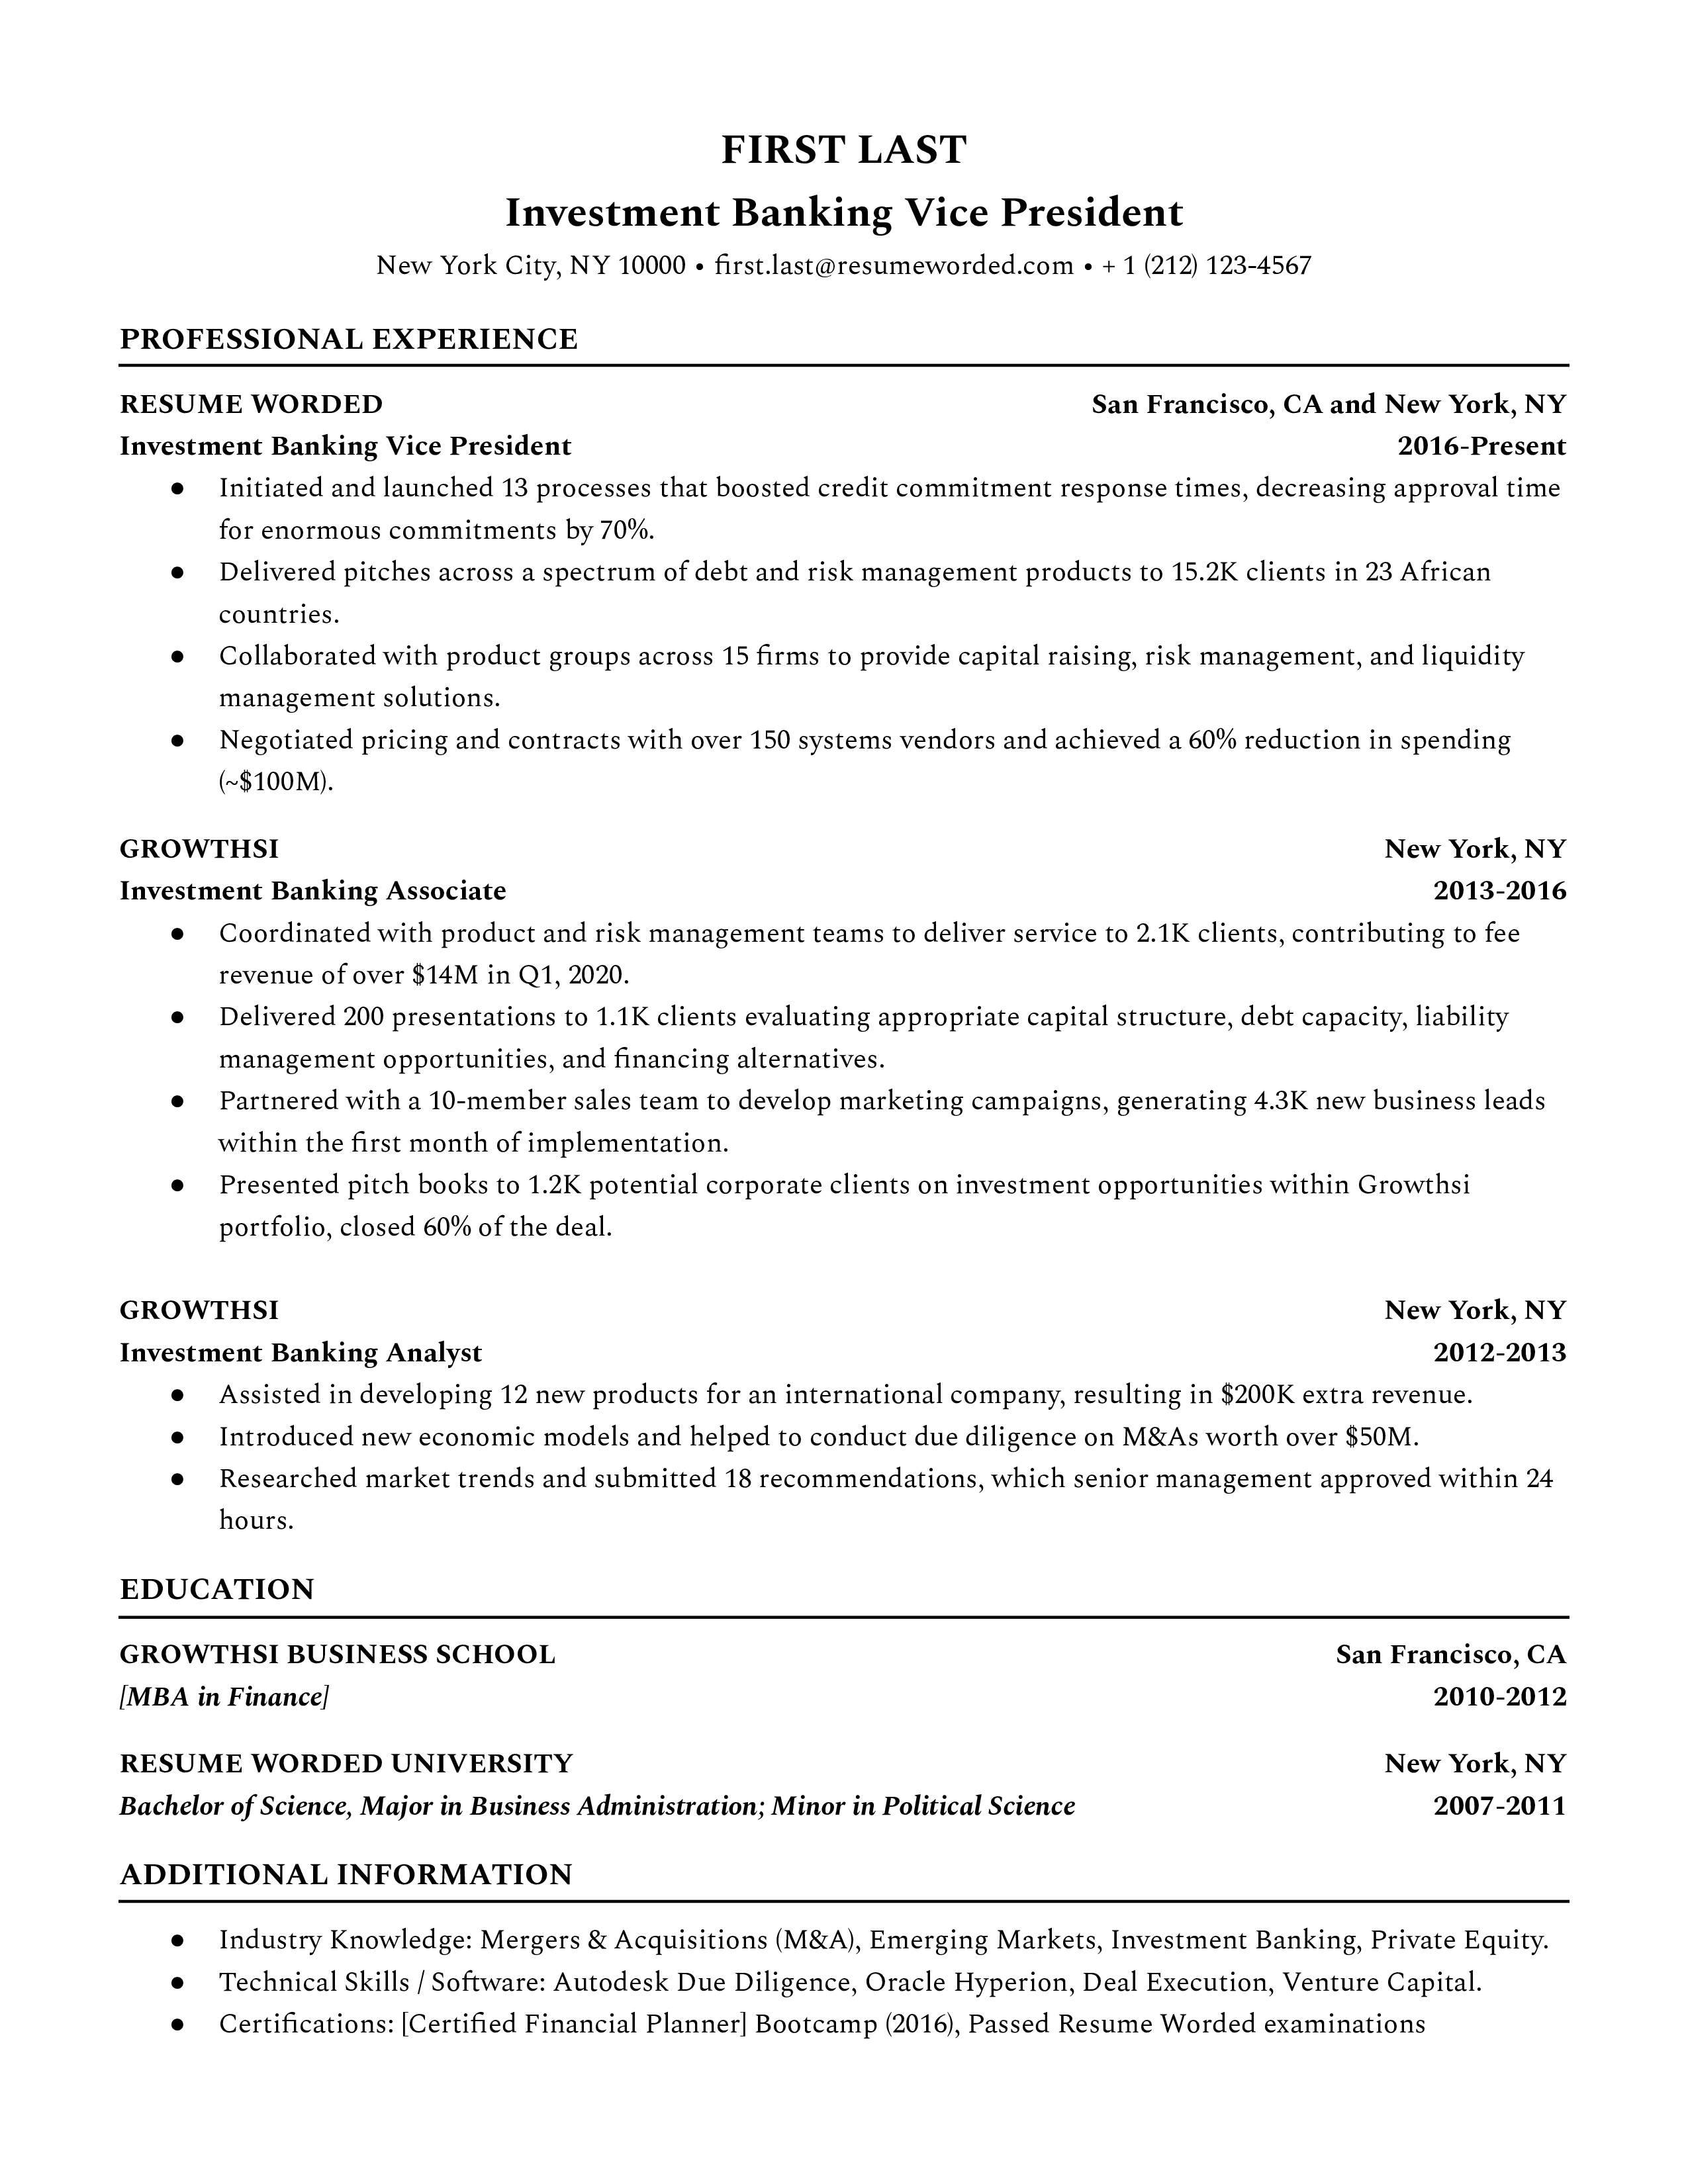 Screenshot of an Investment Banking Vice President resume.